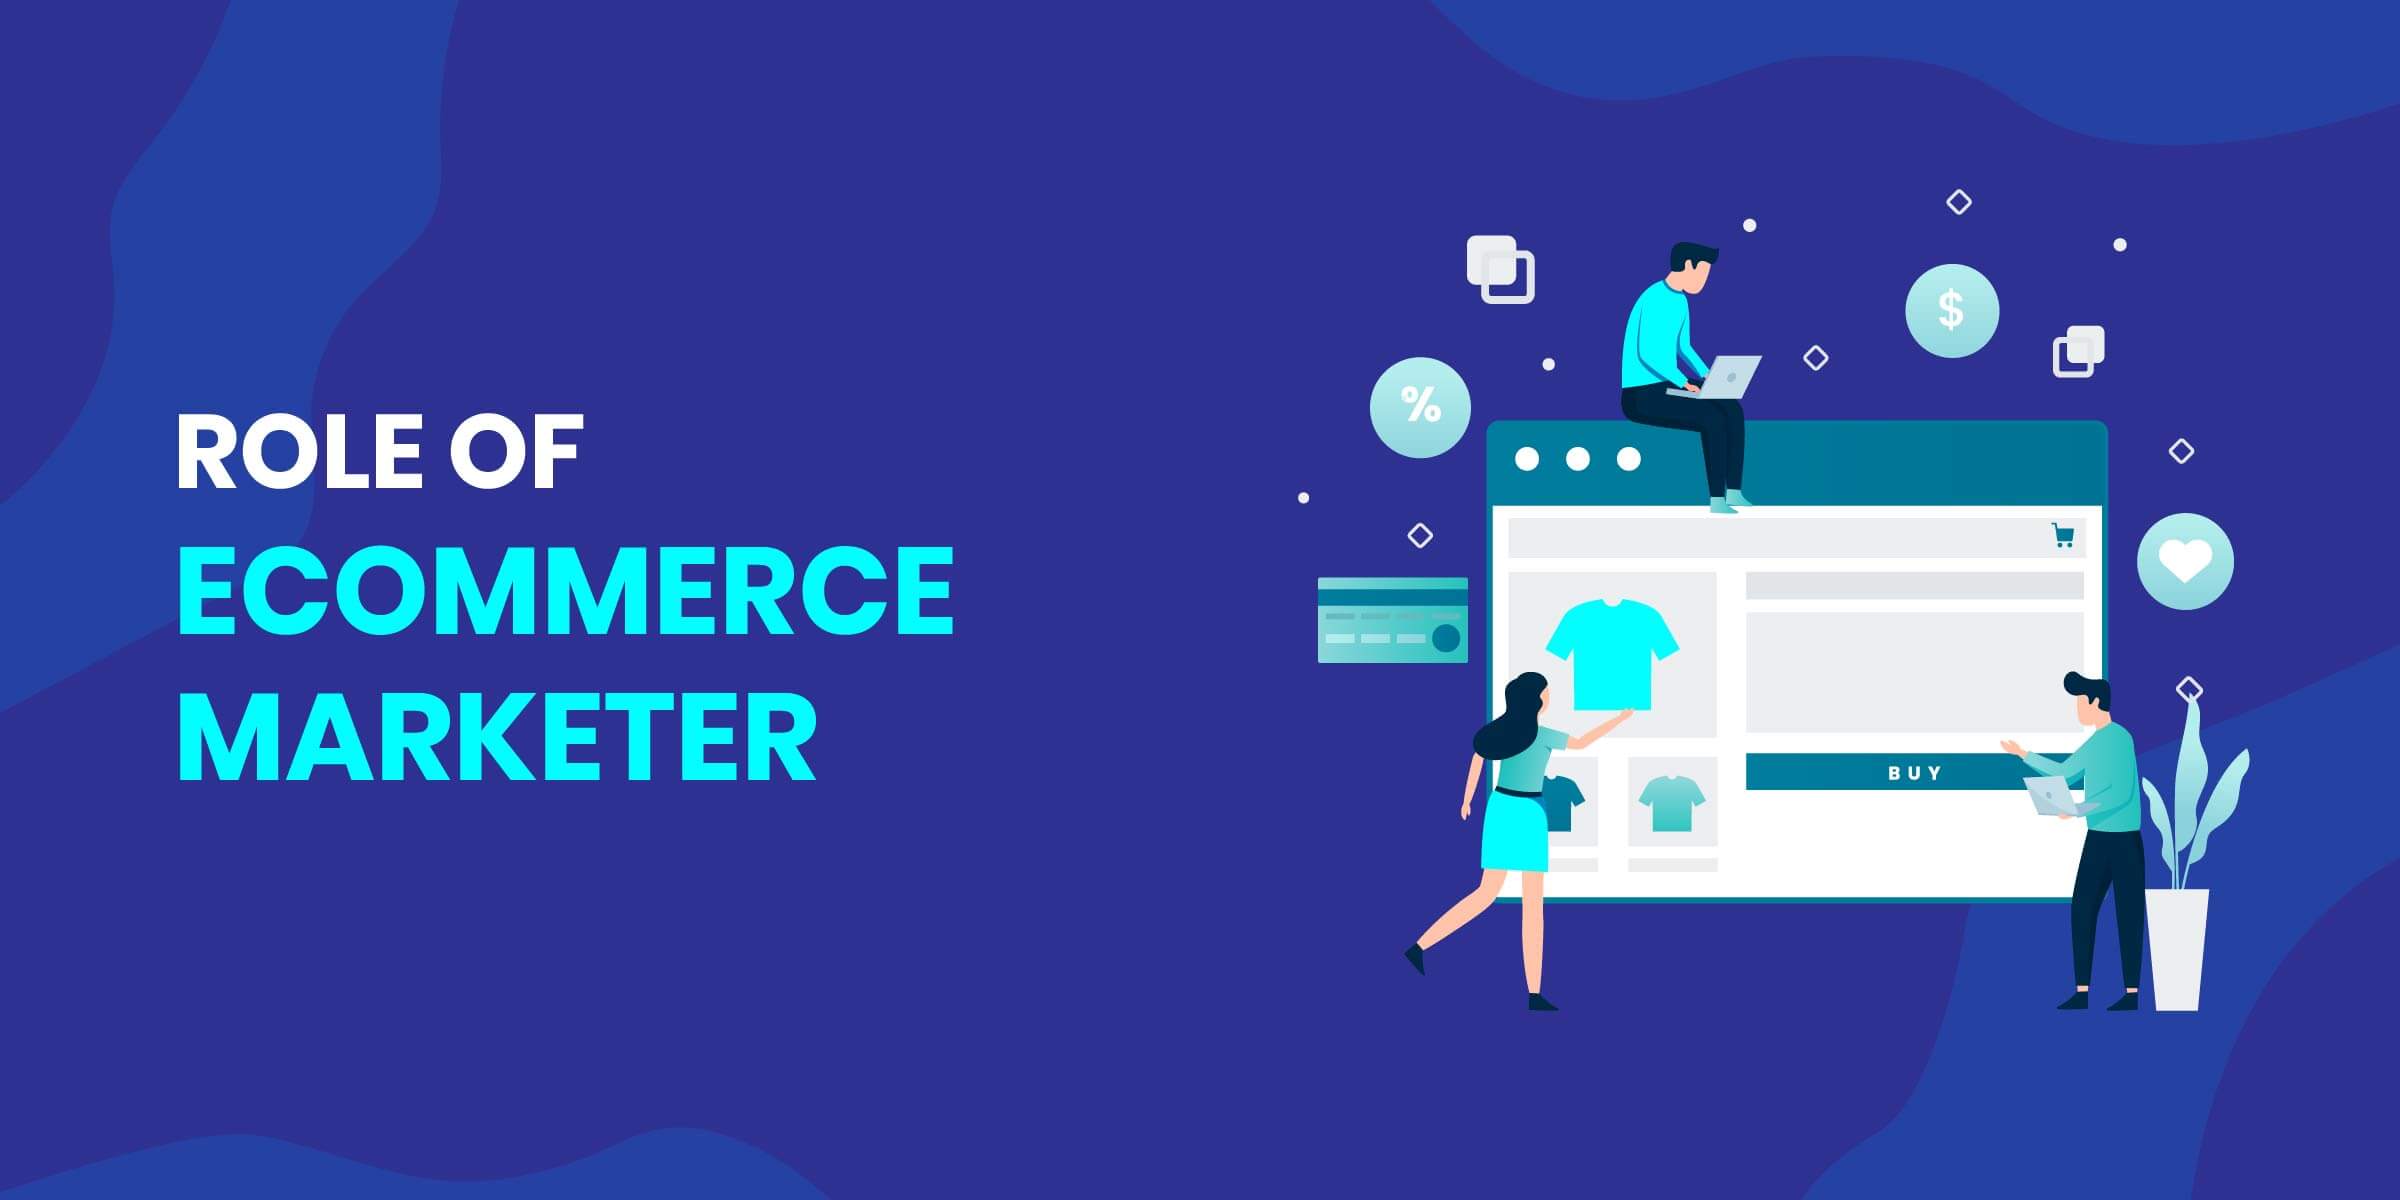 Role of Ecommerce Marketer